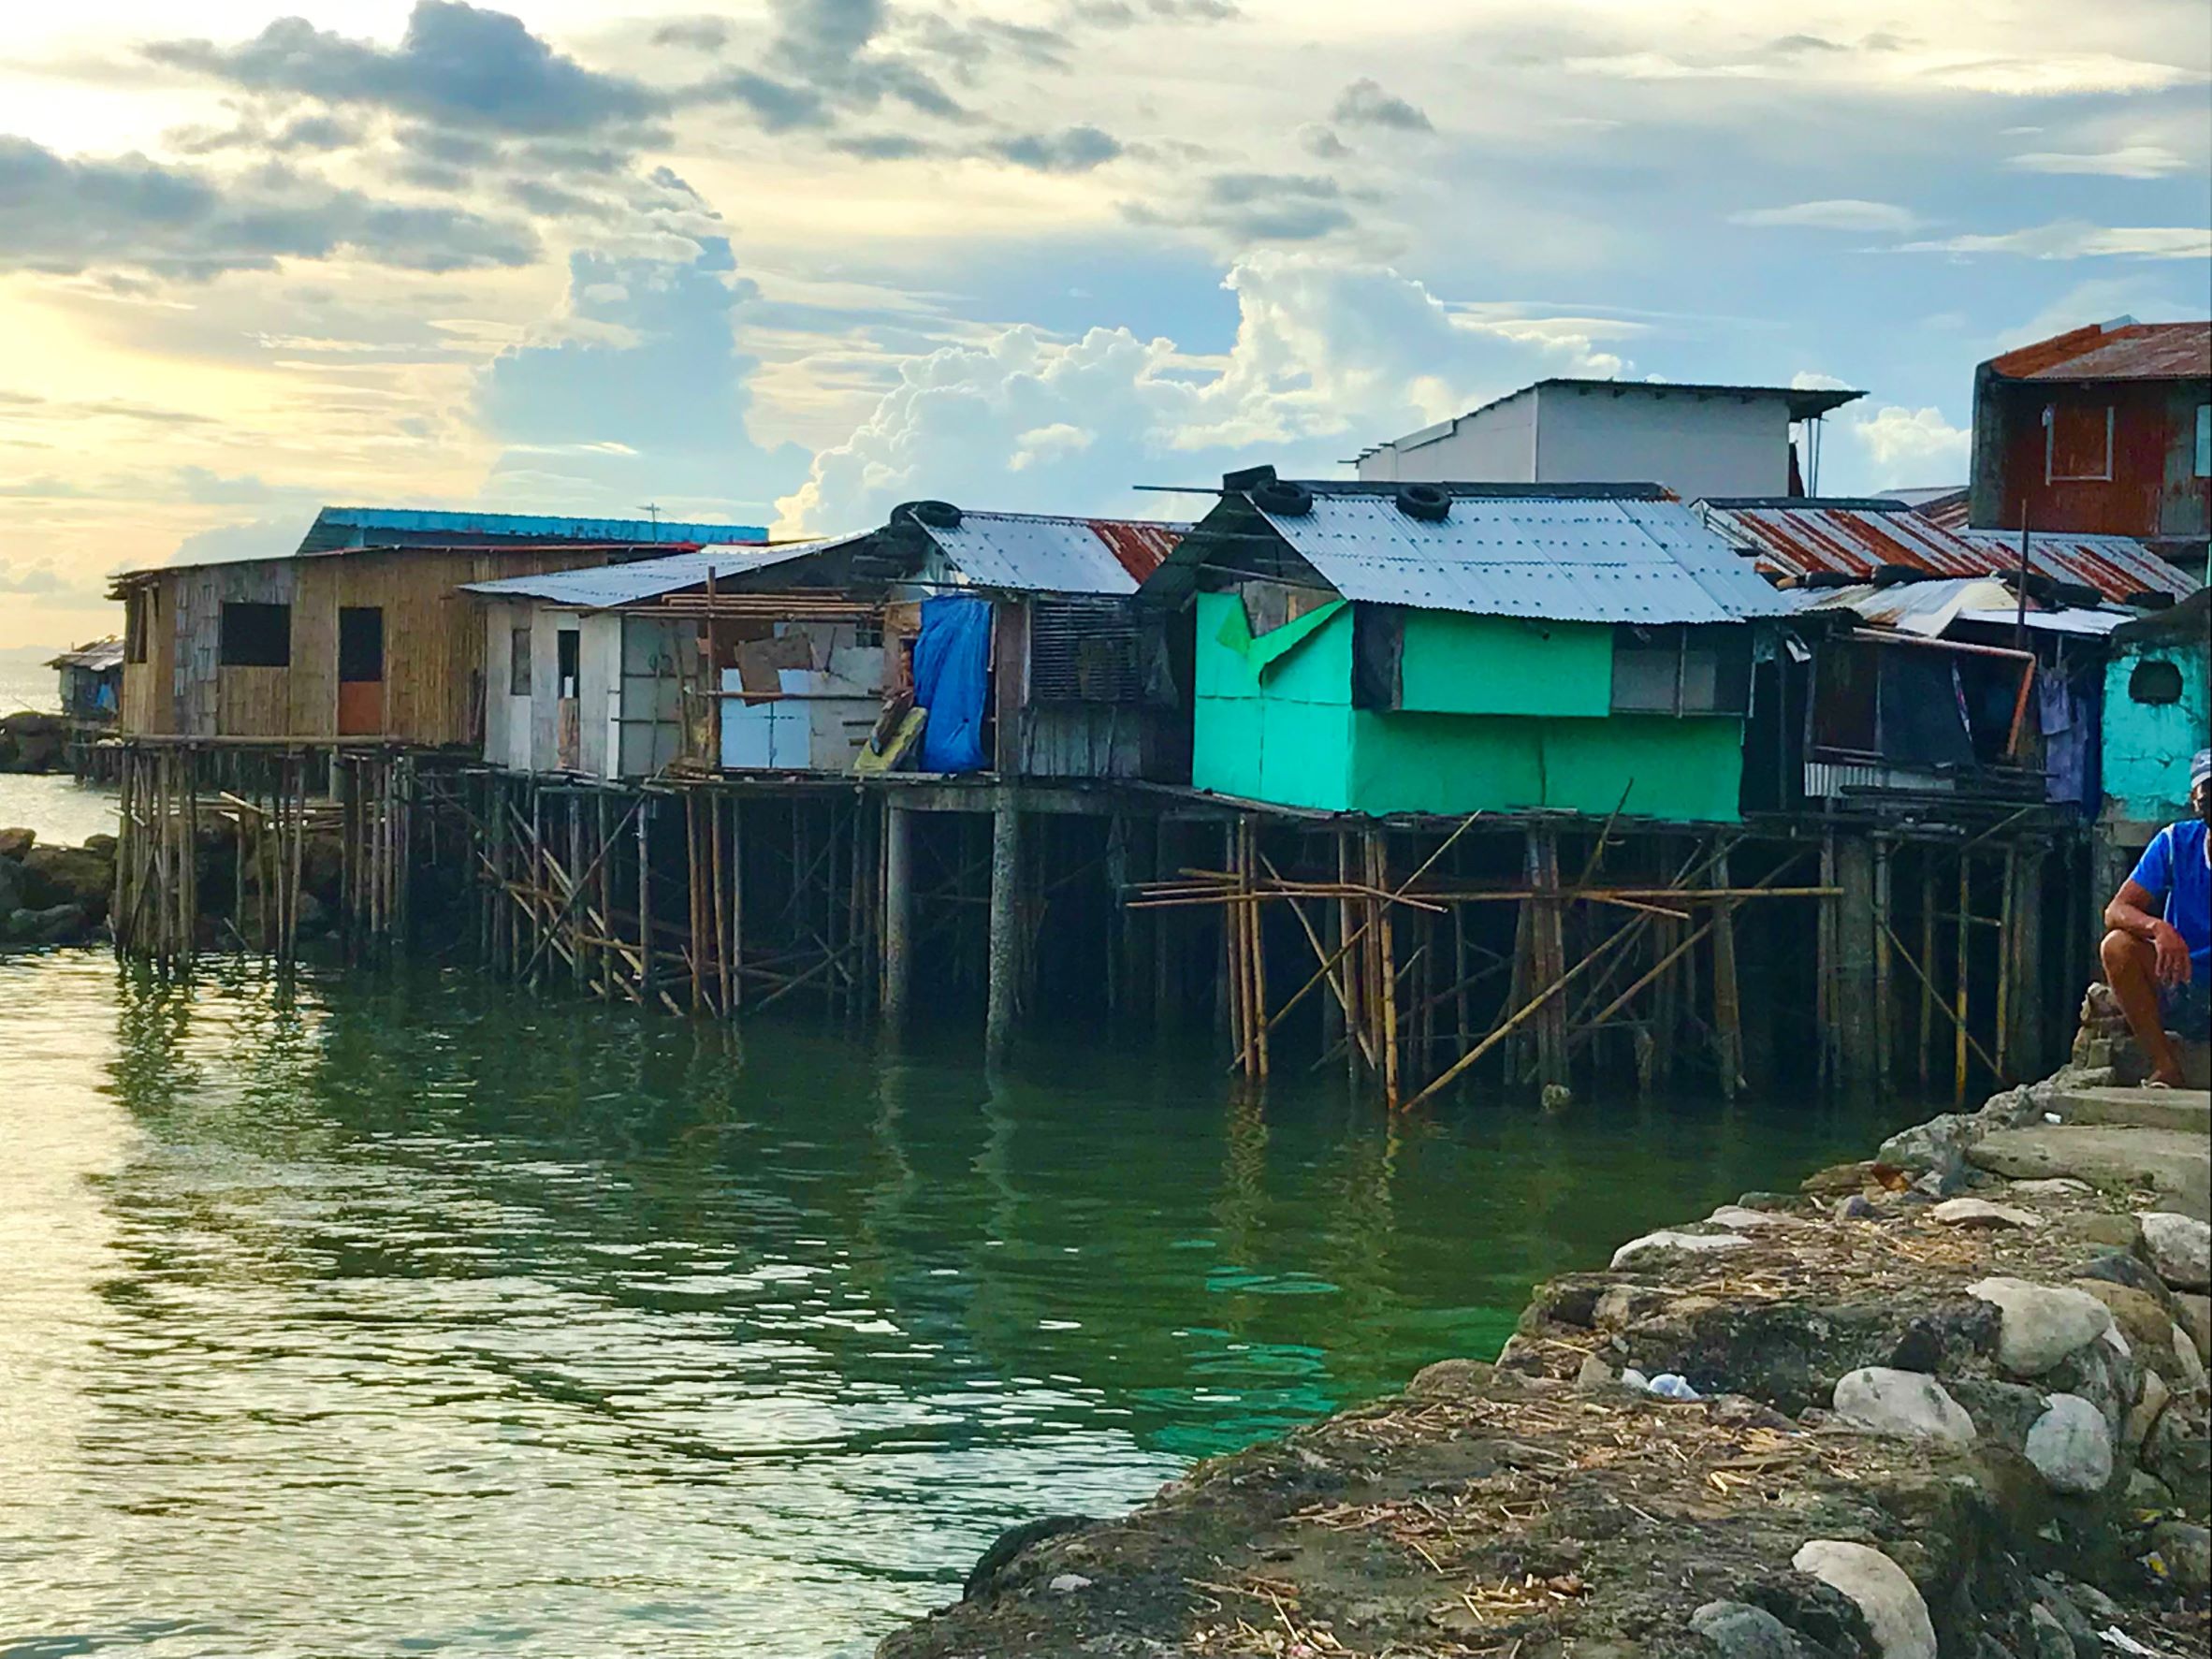 Illegal settlements at the waterfront in Iloilo, the Philippines, a city renowned for its rich history and culture. Photo taken by Peilei Fan on Nov. 11, 2022. 